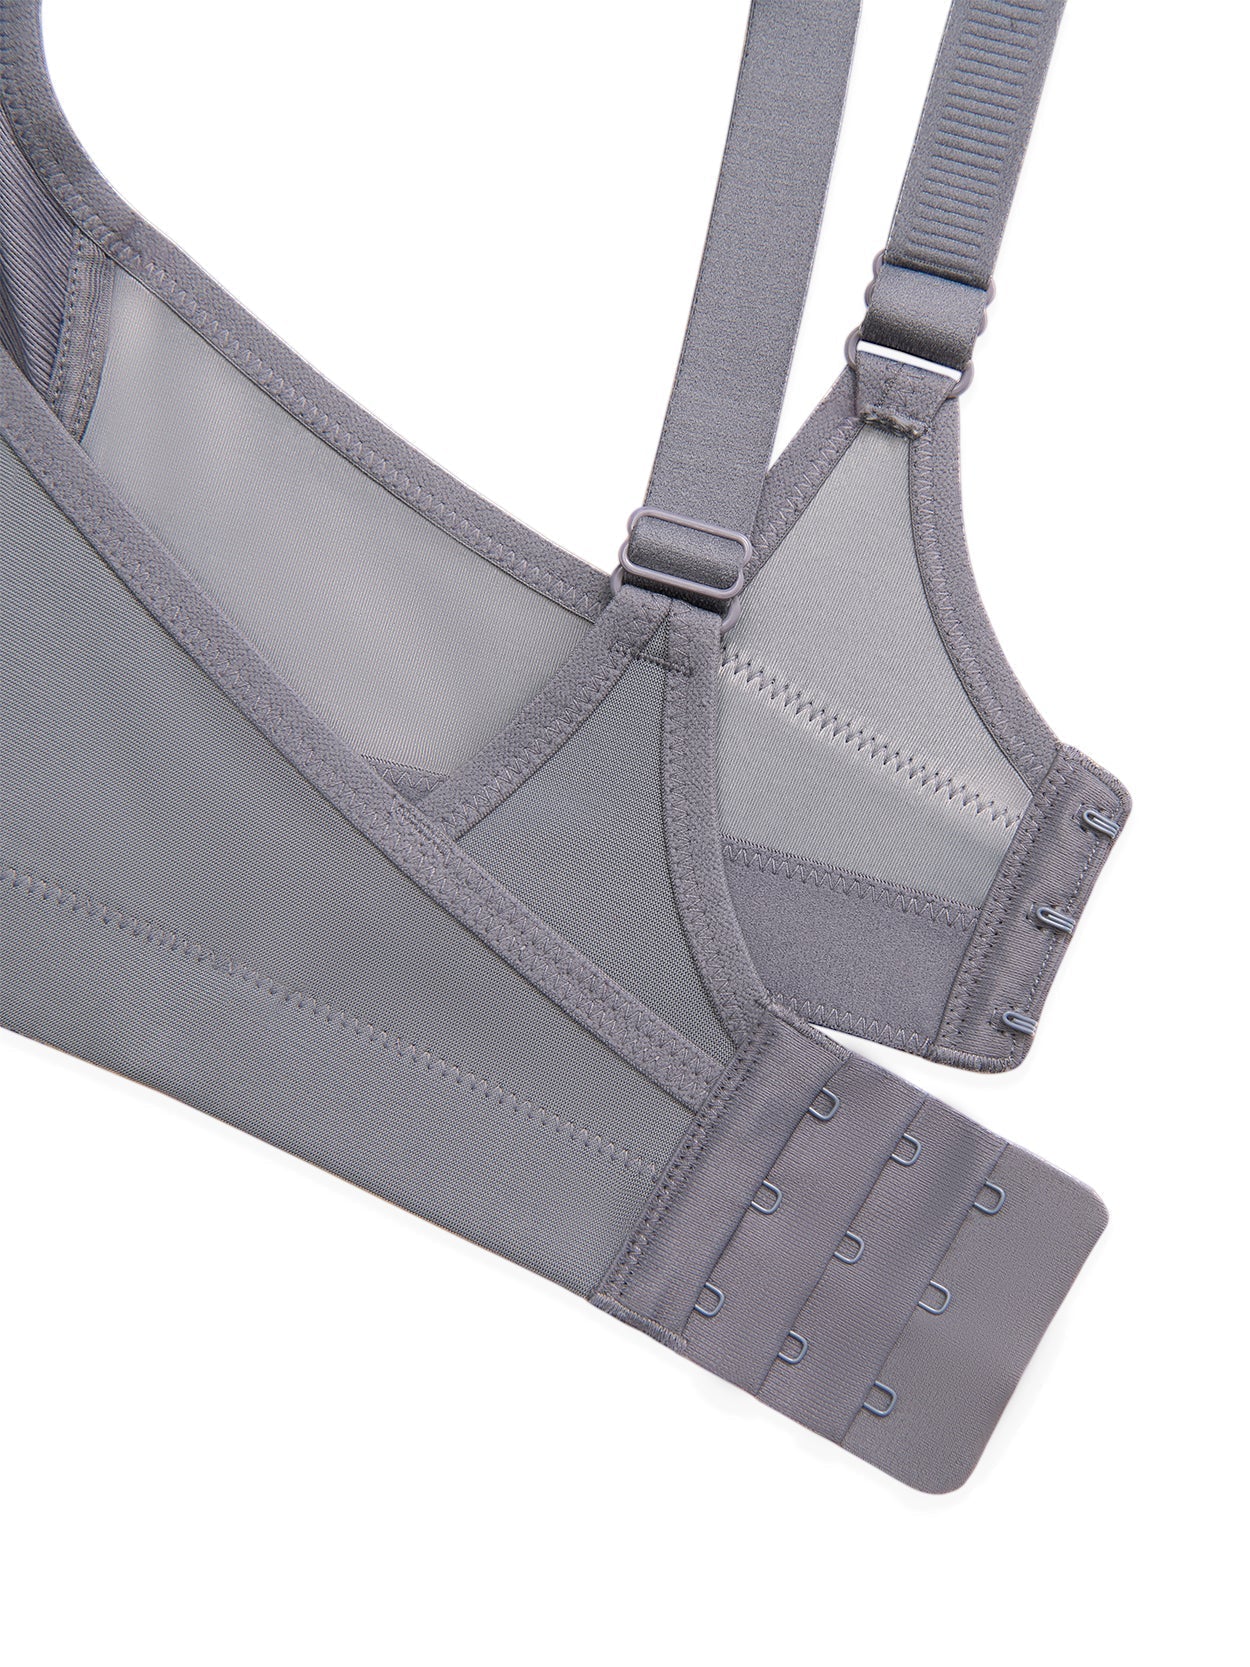  ZYZSTR Removable Pads Sports Bra Breathable Wirefree